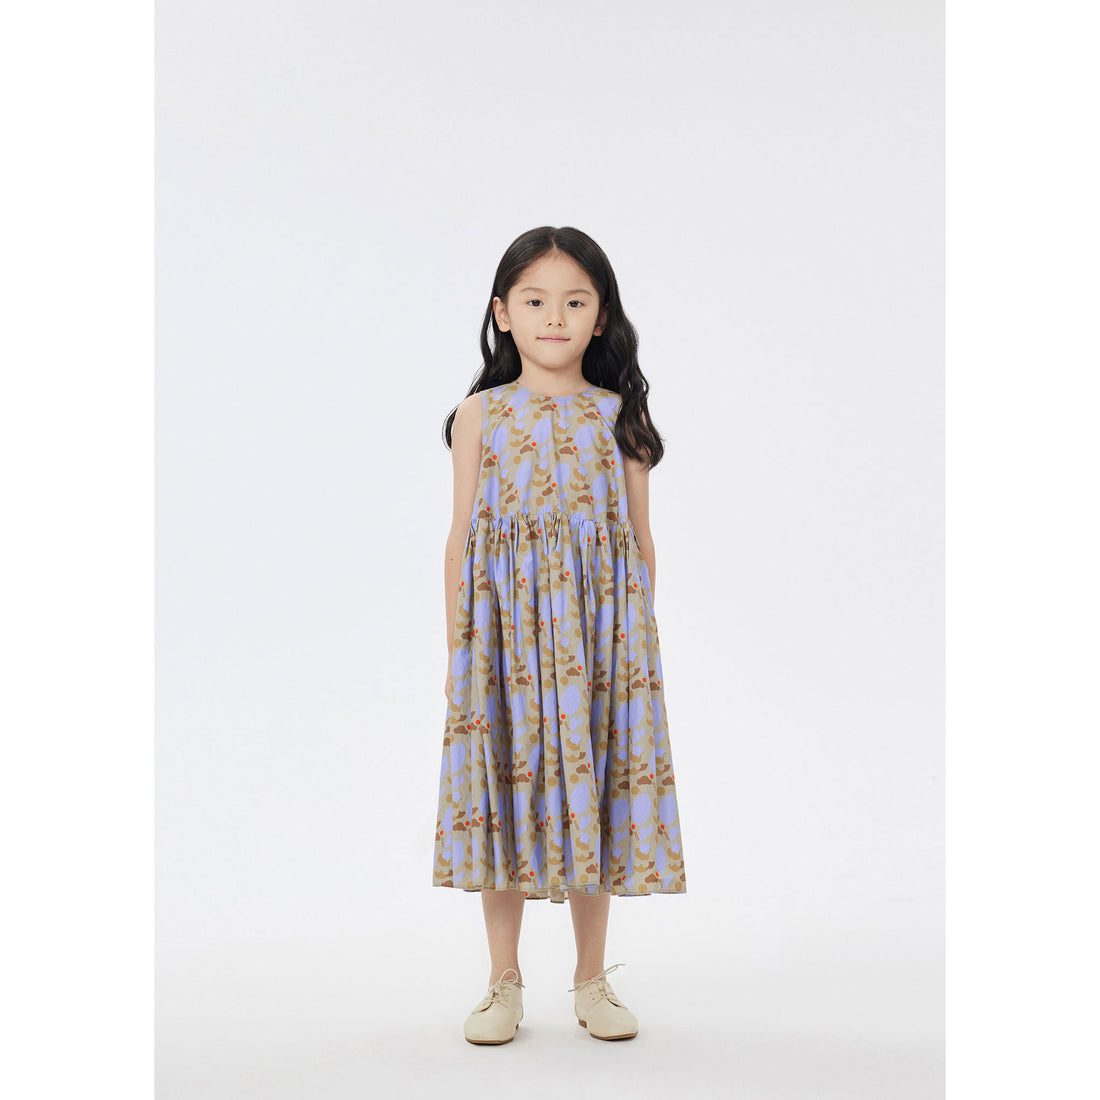 JNBY Brown Floral Sleeveless Dress